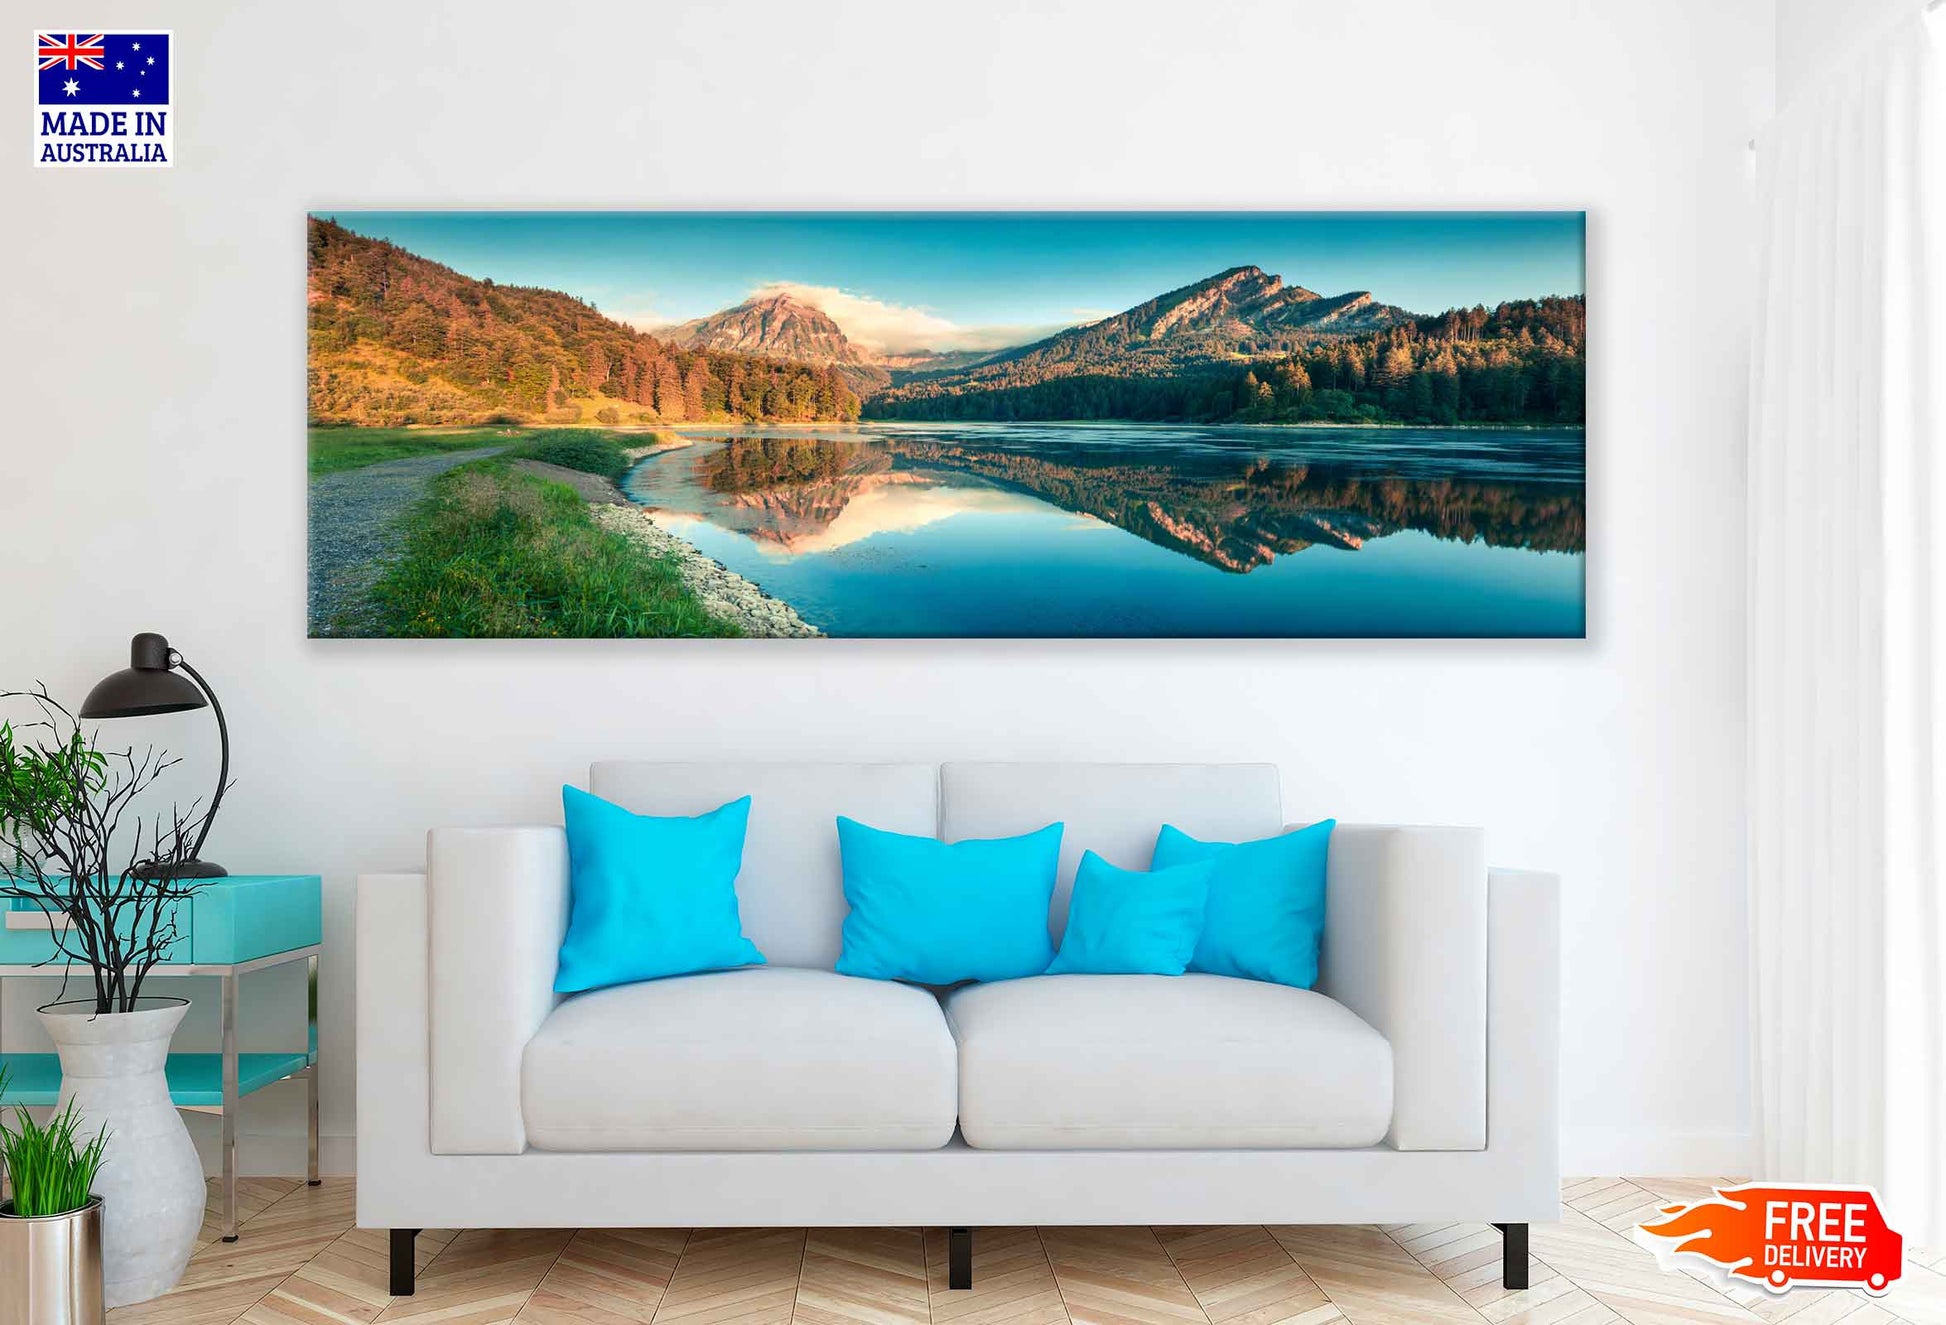 Panoramic Canvas Obersee Lake With Mountain View High Quality 100% Australian Made Wall Canvas Print Ready to Hang